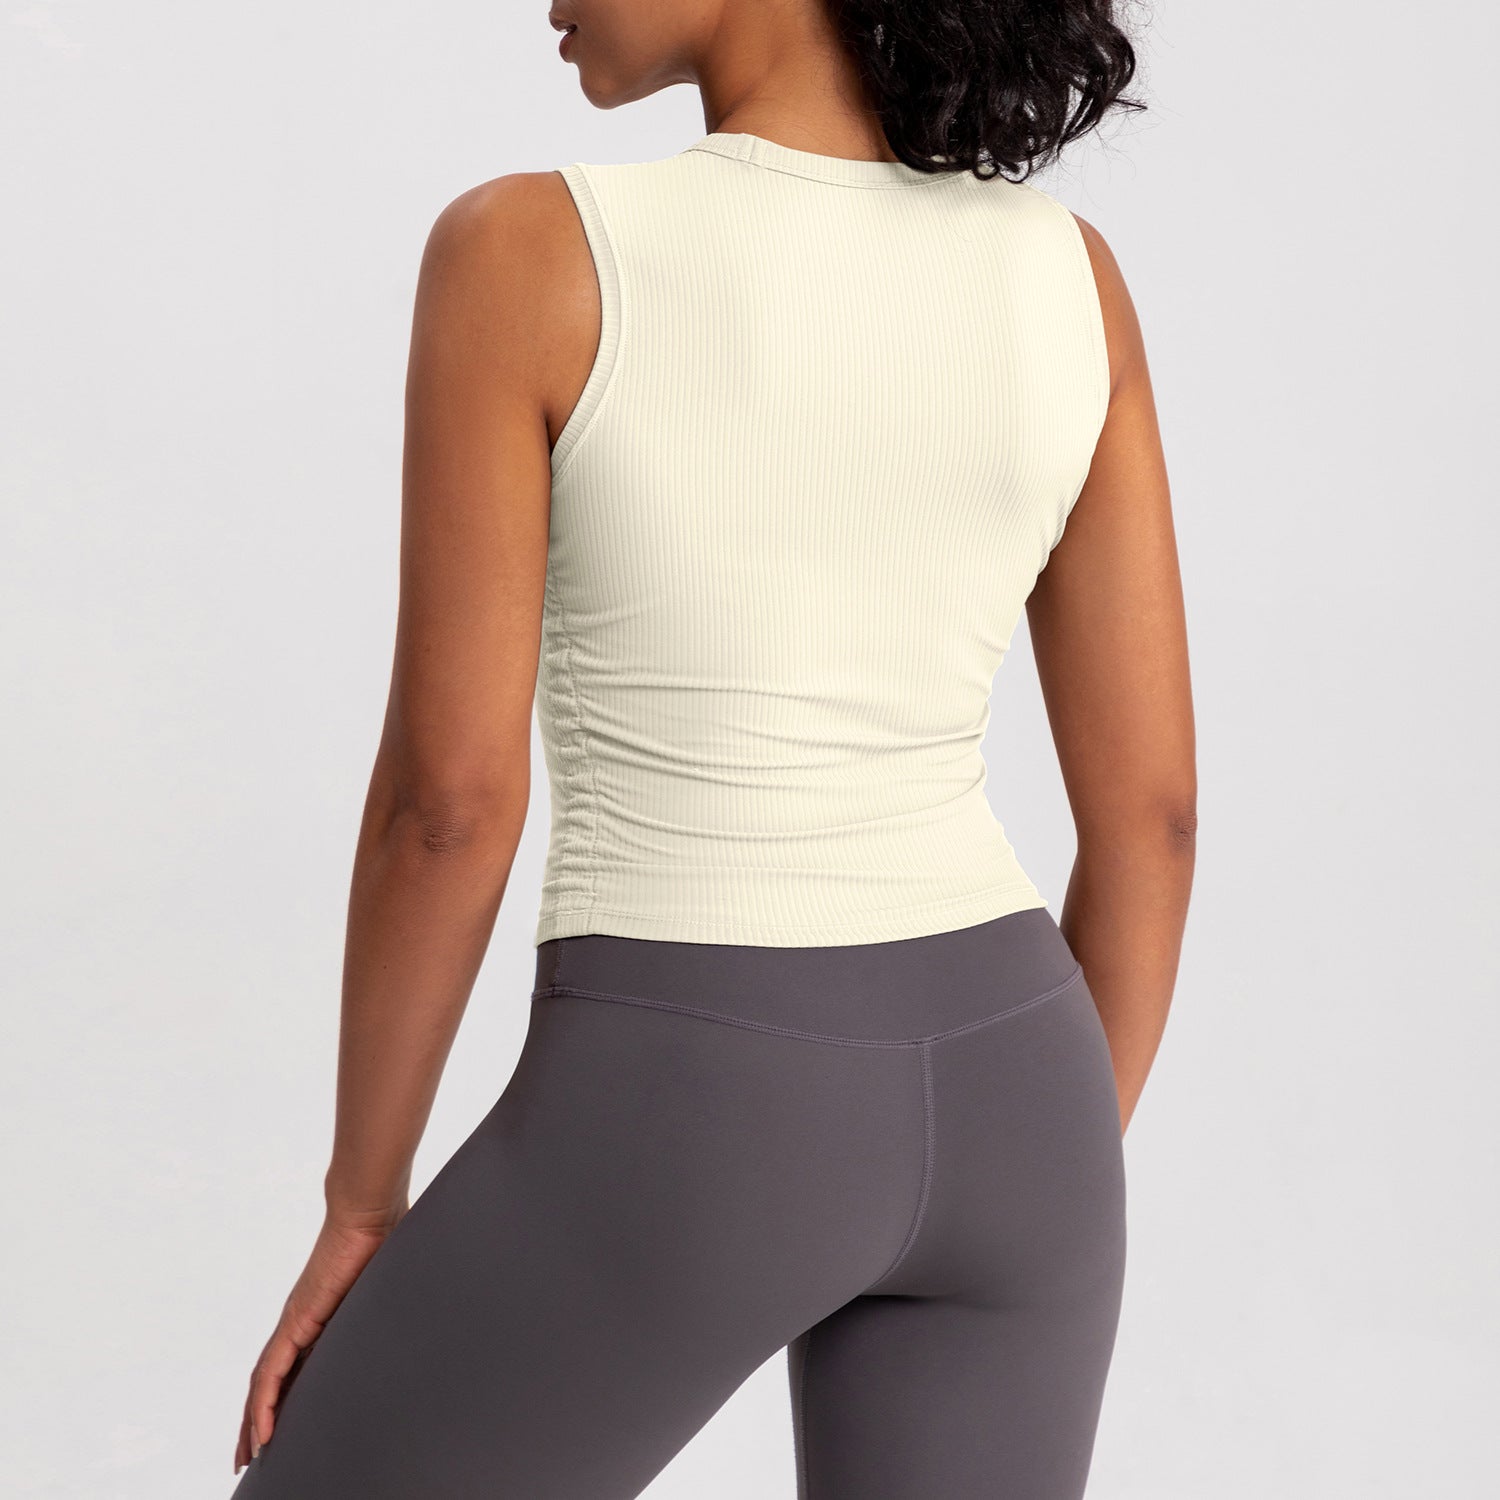 Running top slimming fit fitness yoga outfit